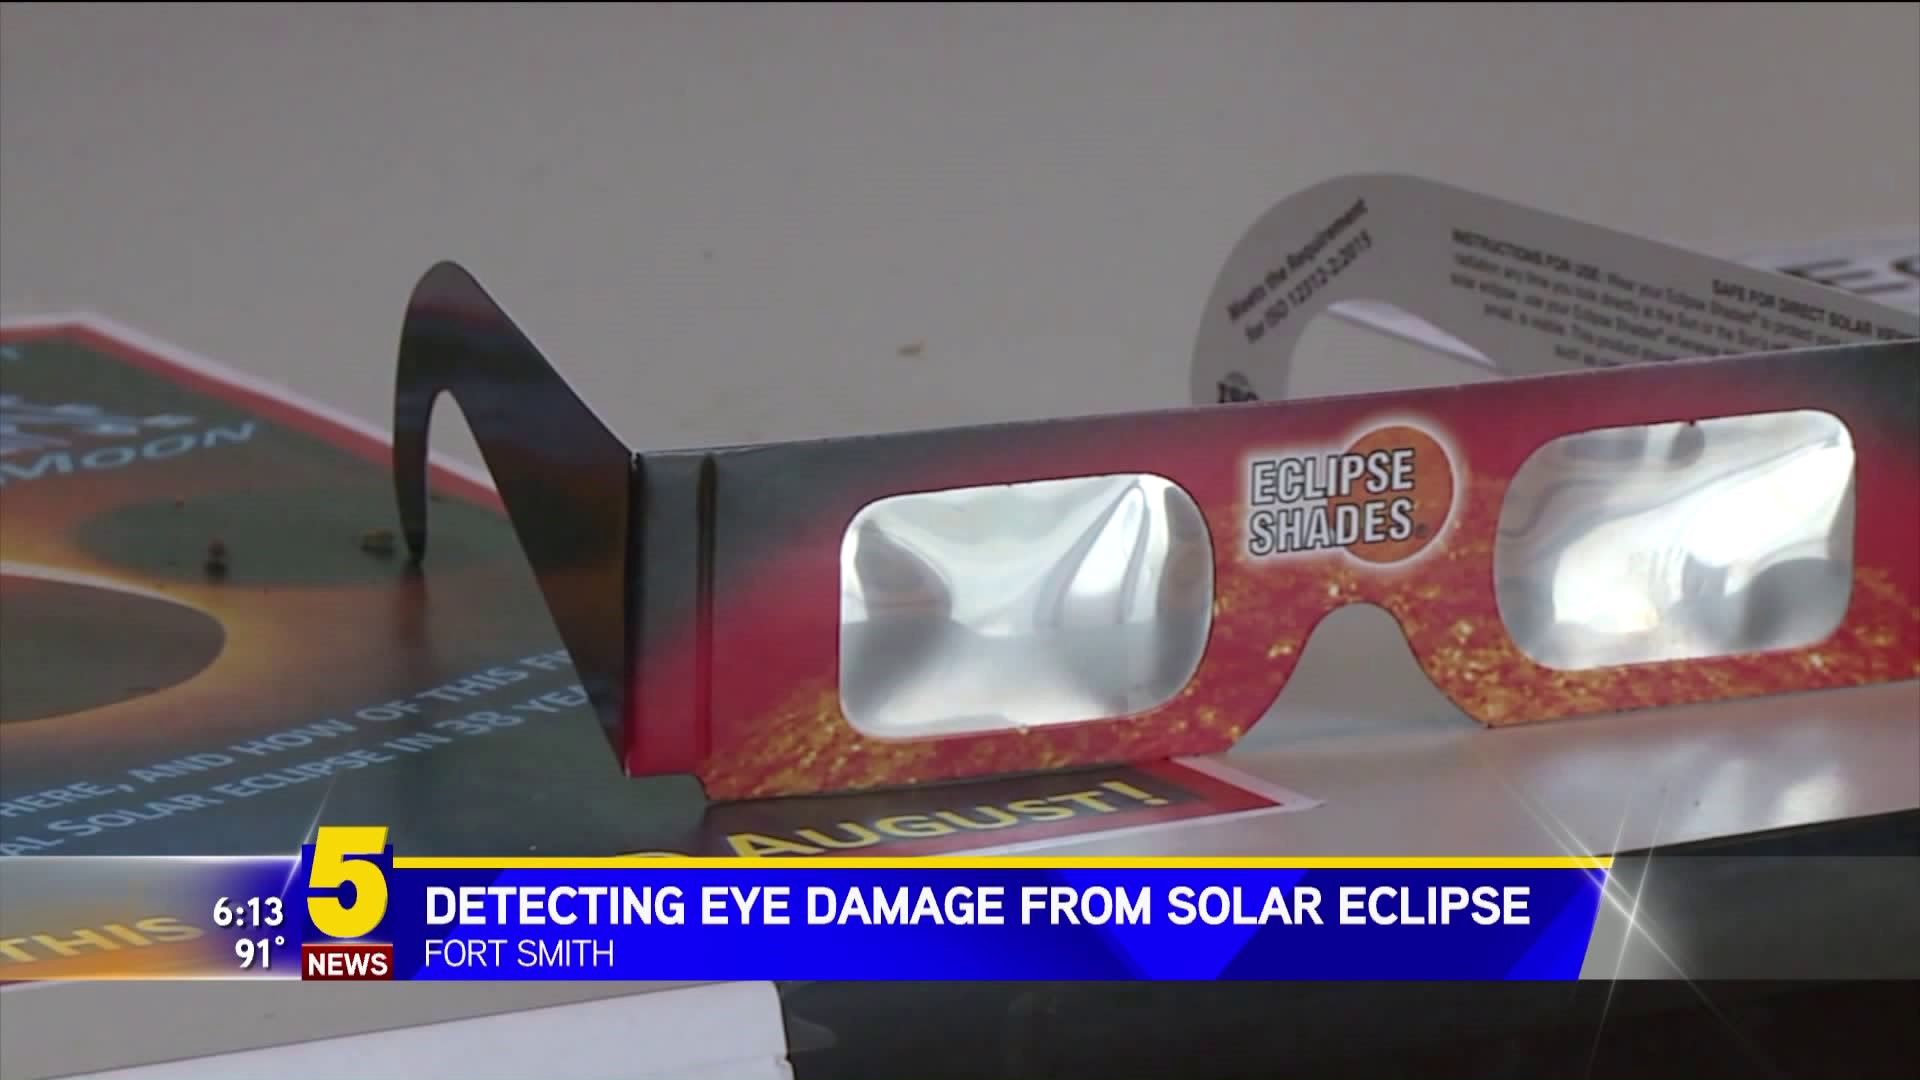 Detecting Eye Damage From Solar Eclipse